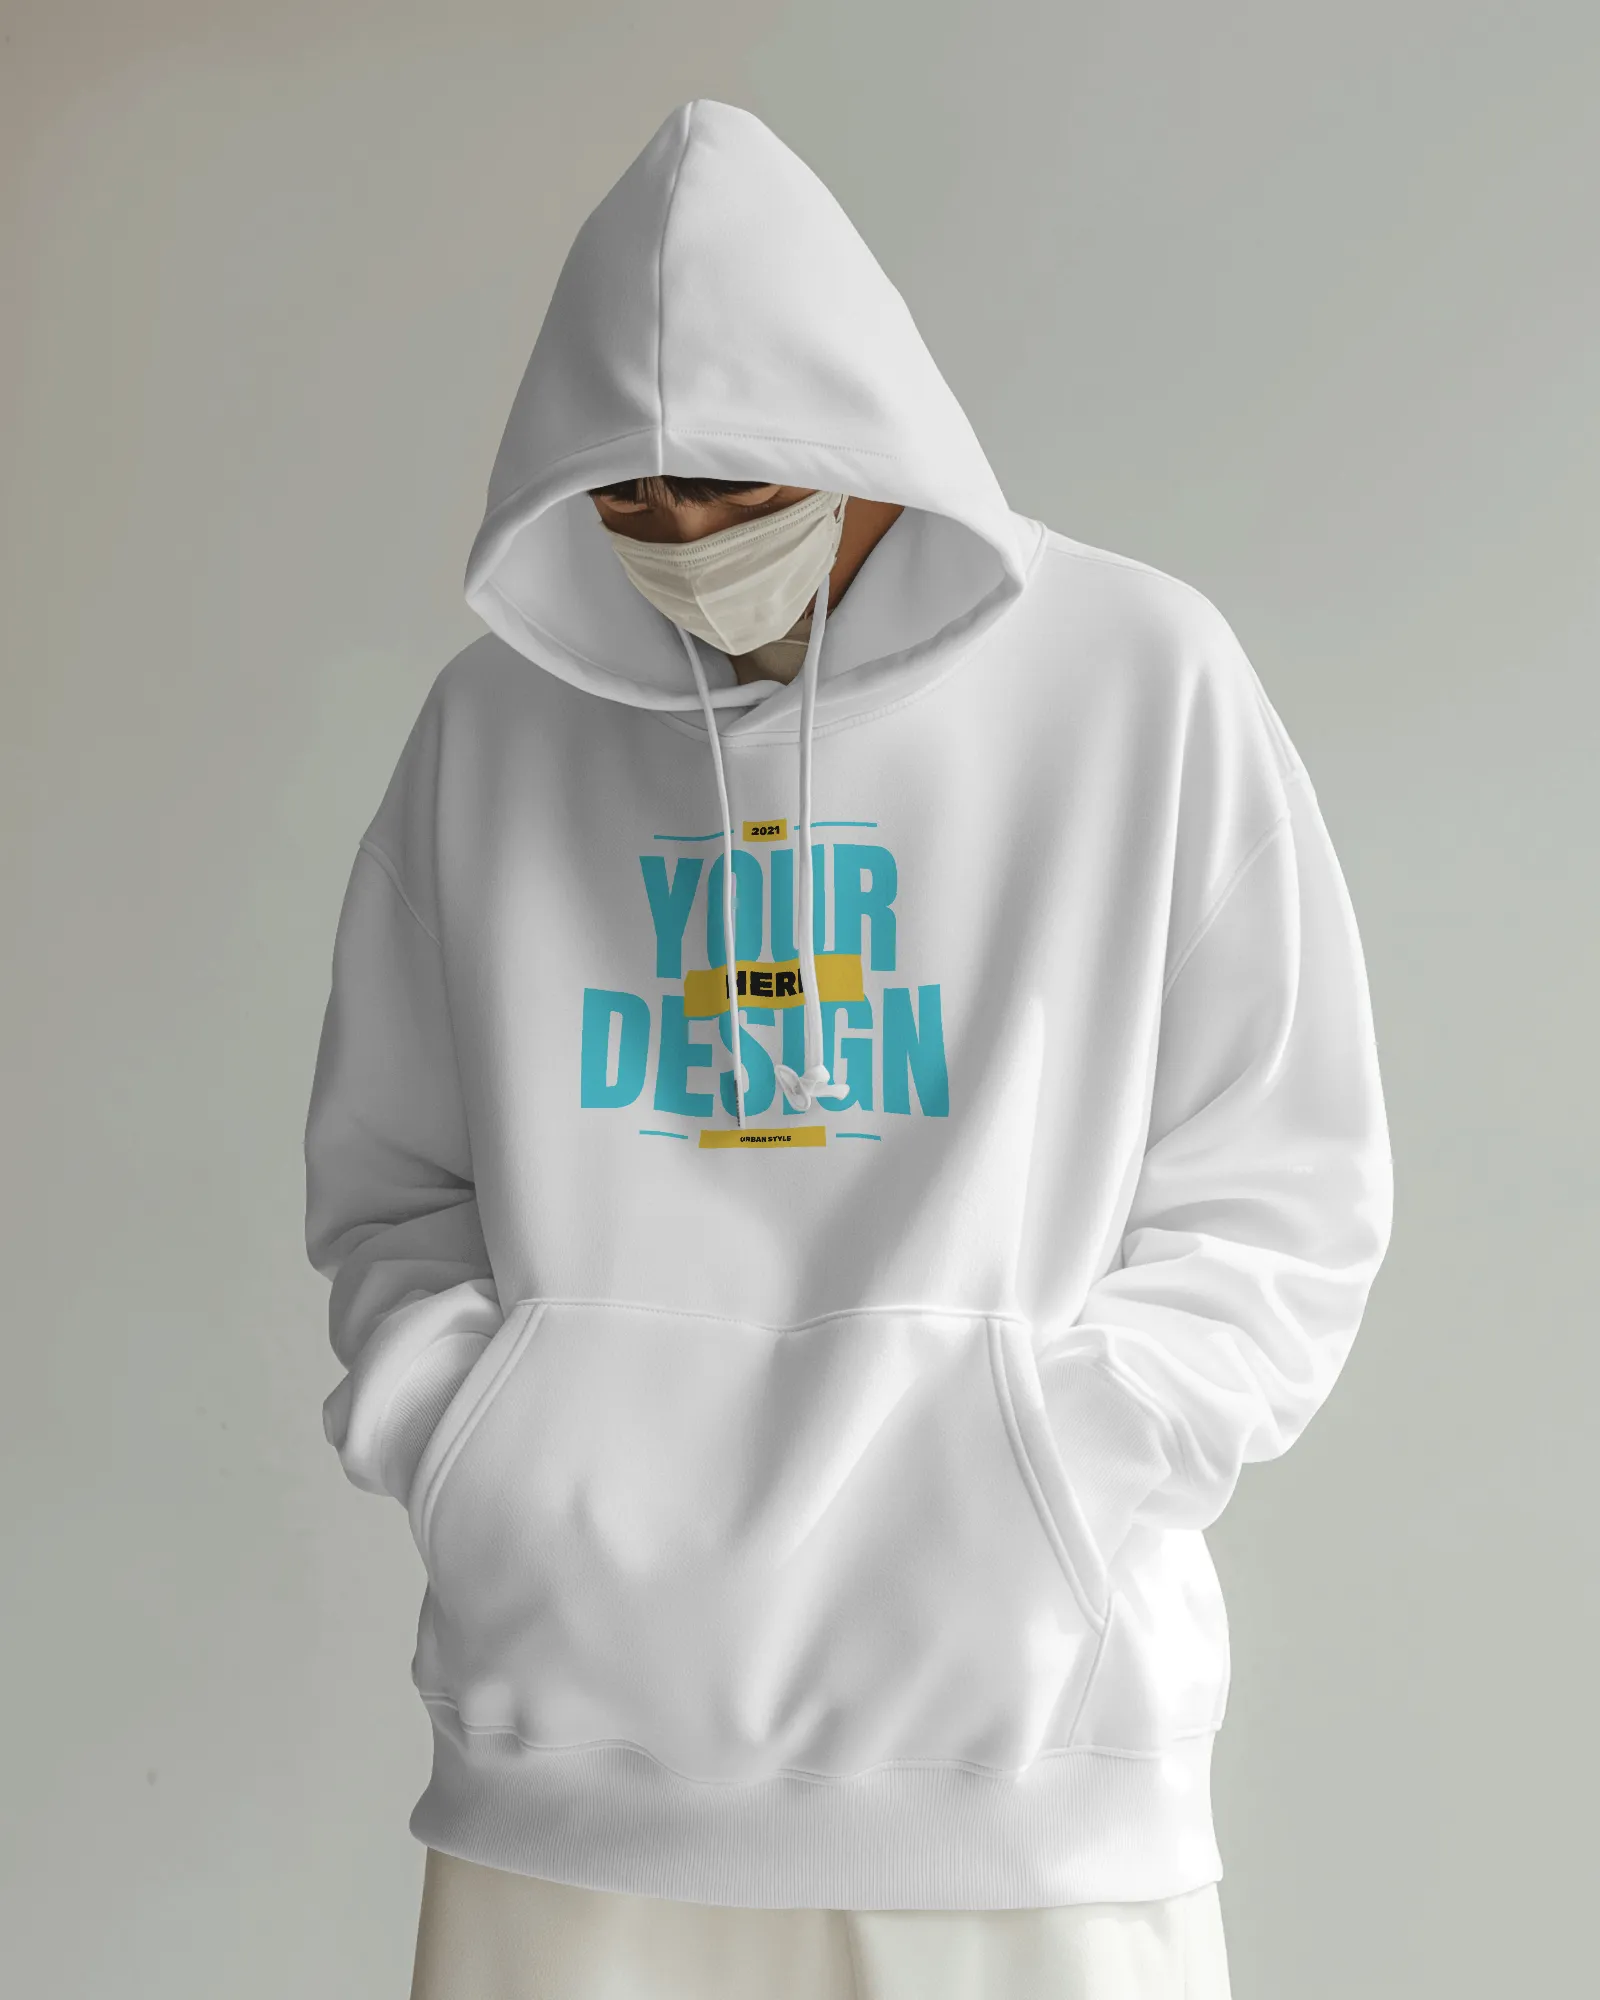 stylish hoodie mockup wore by a young man looking down